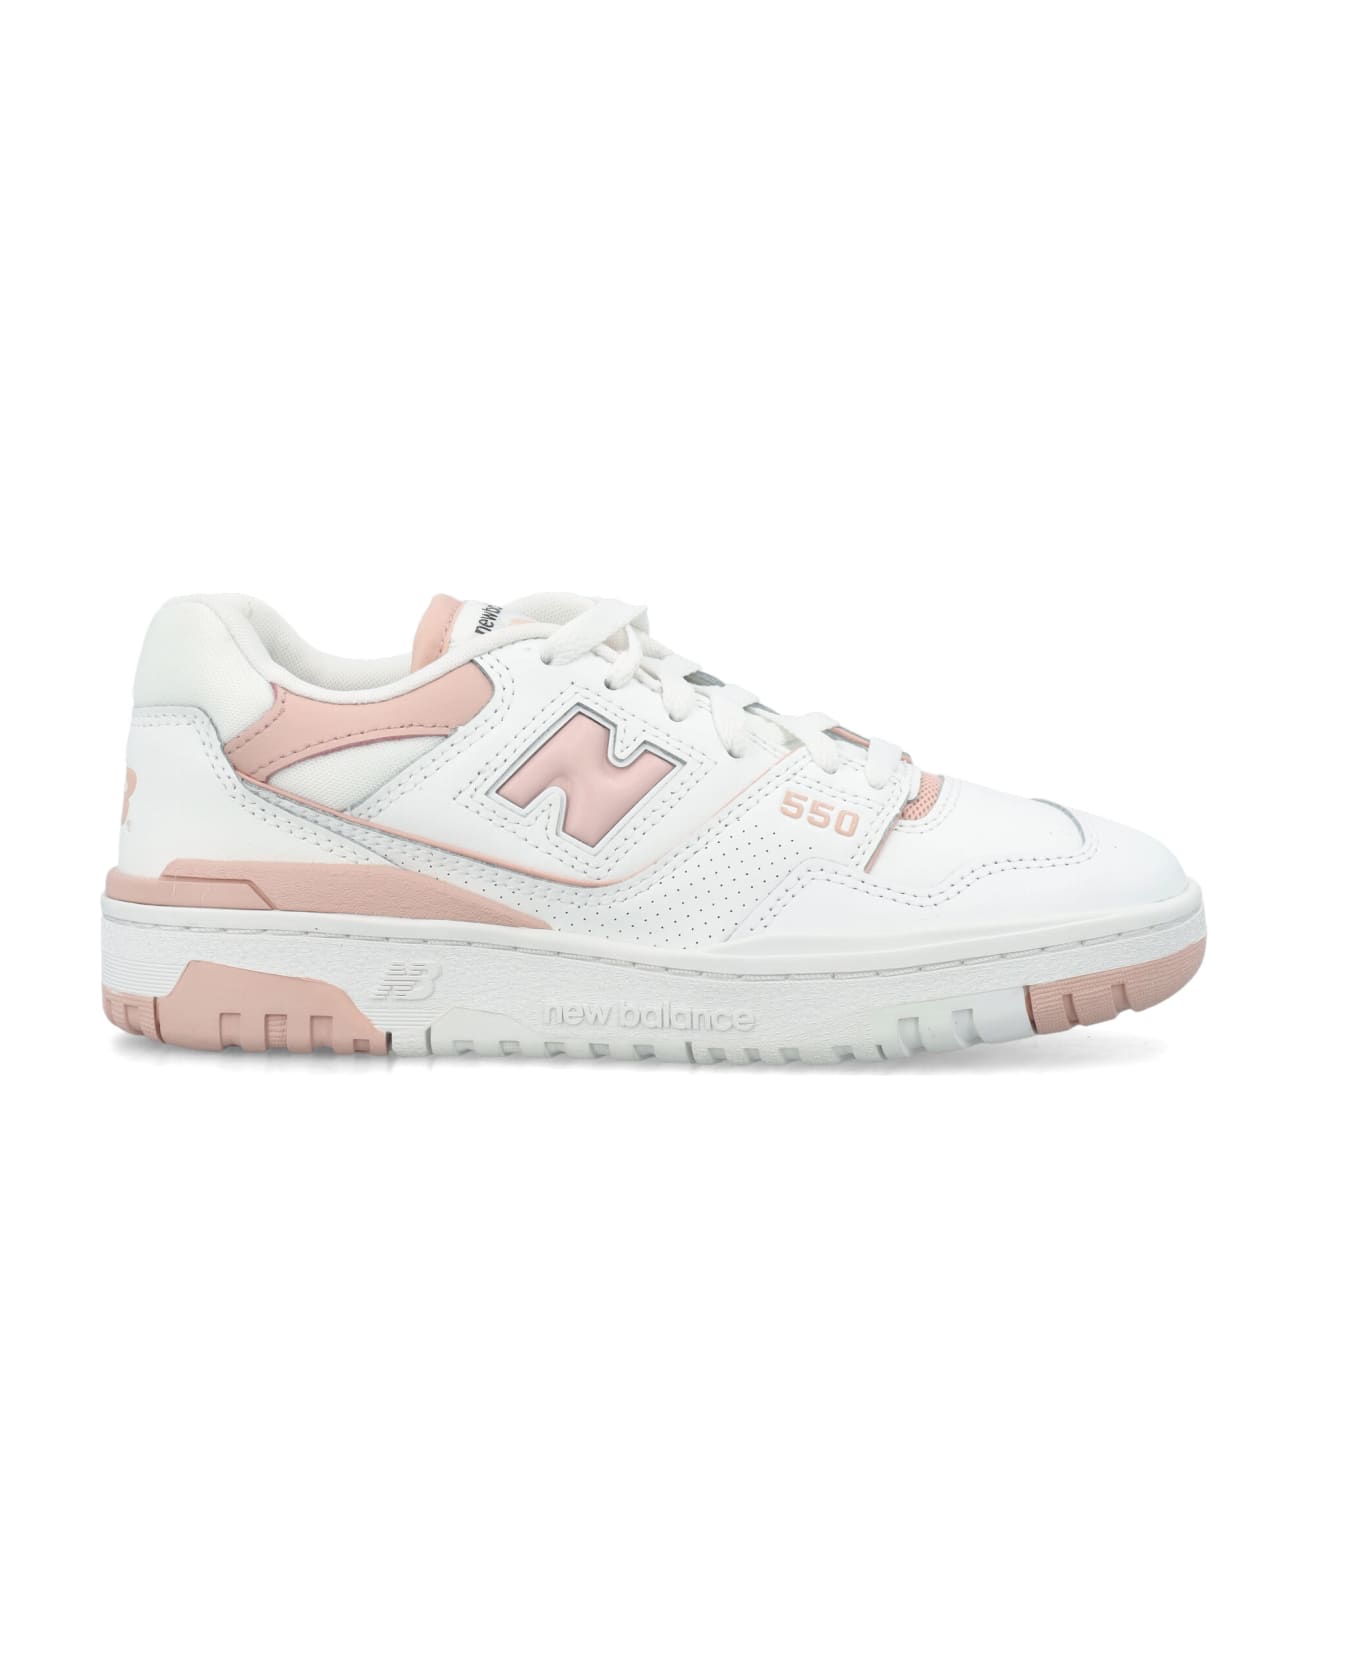 New Balance 550 Woman's Sneakers - WHITE PINK